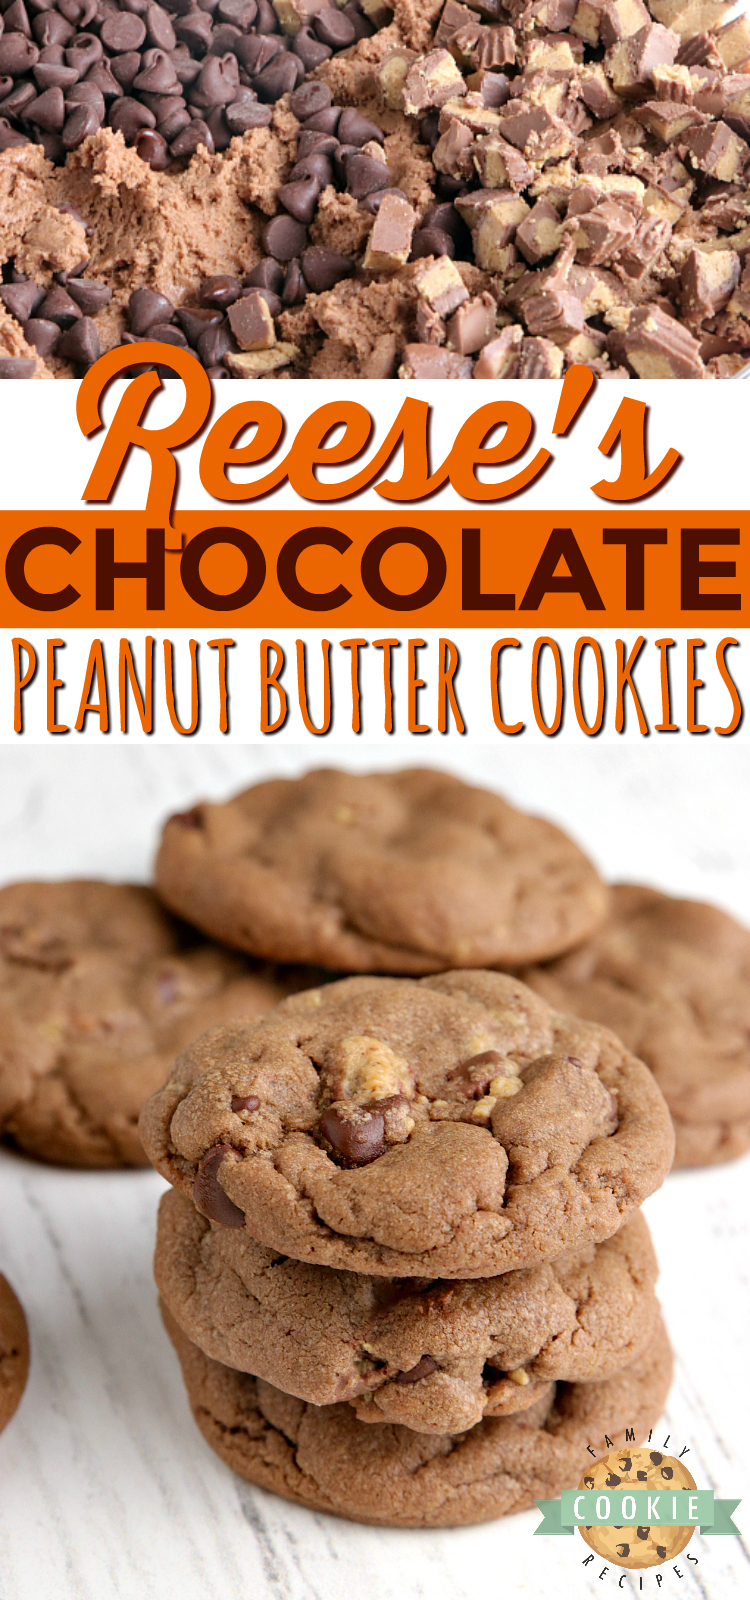 Reese's Chocolate Peanut Butter Cookies are full of chocolate, peanut butter and Reese's Peanut Butter Cups. Peanut butter cookie recipe that is soft, chewy and absolutely perfect!